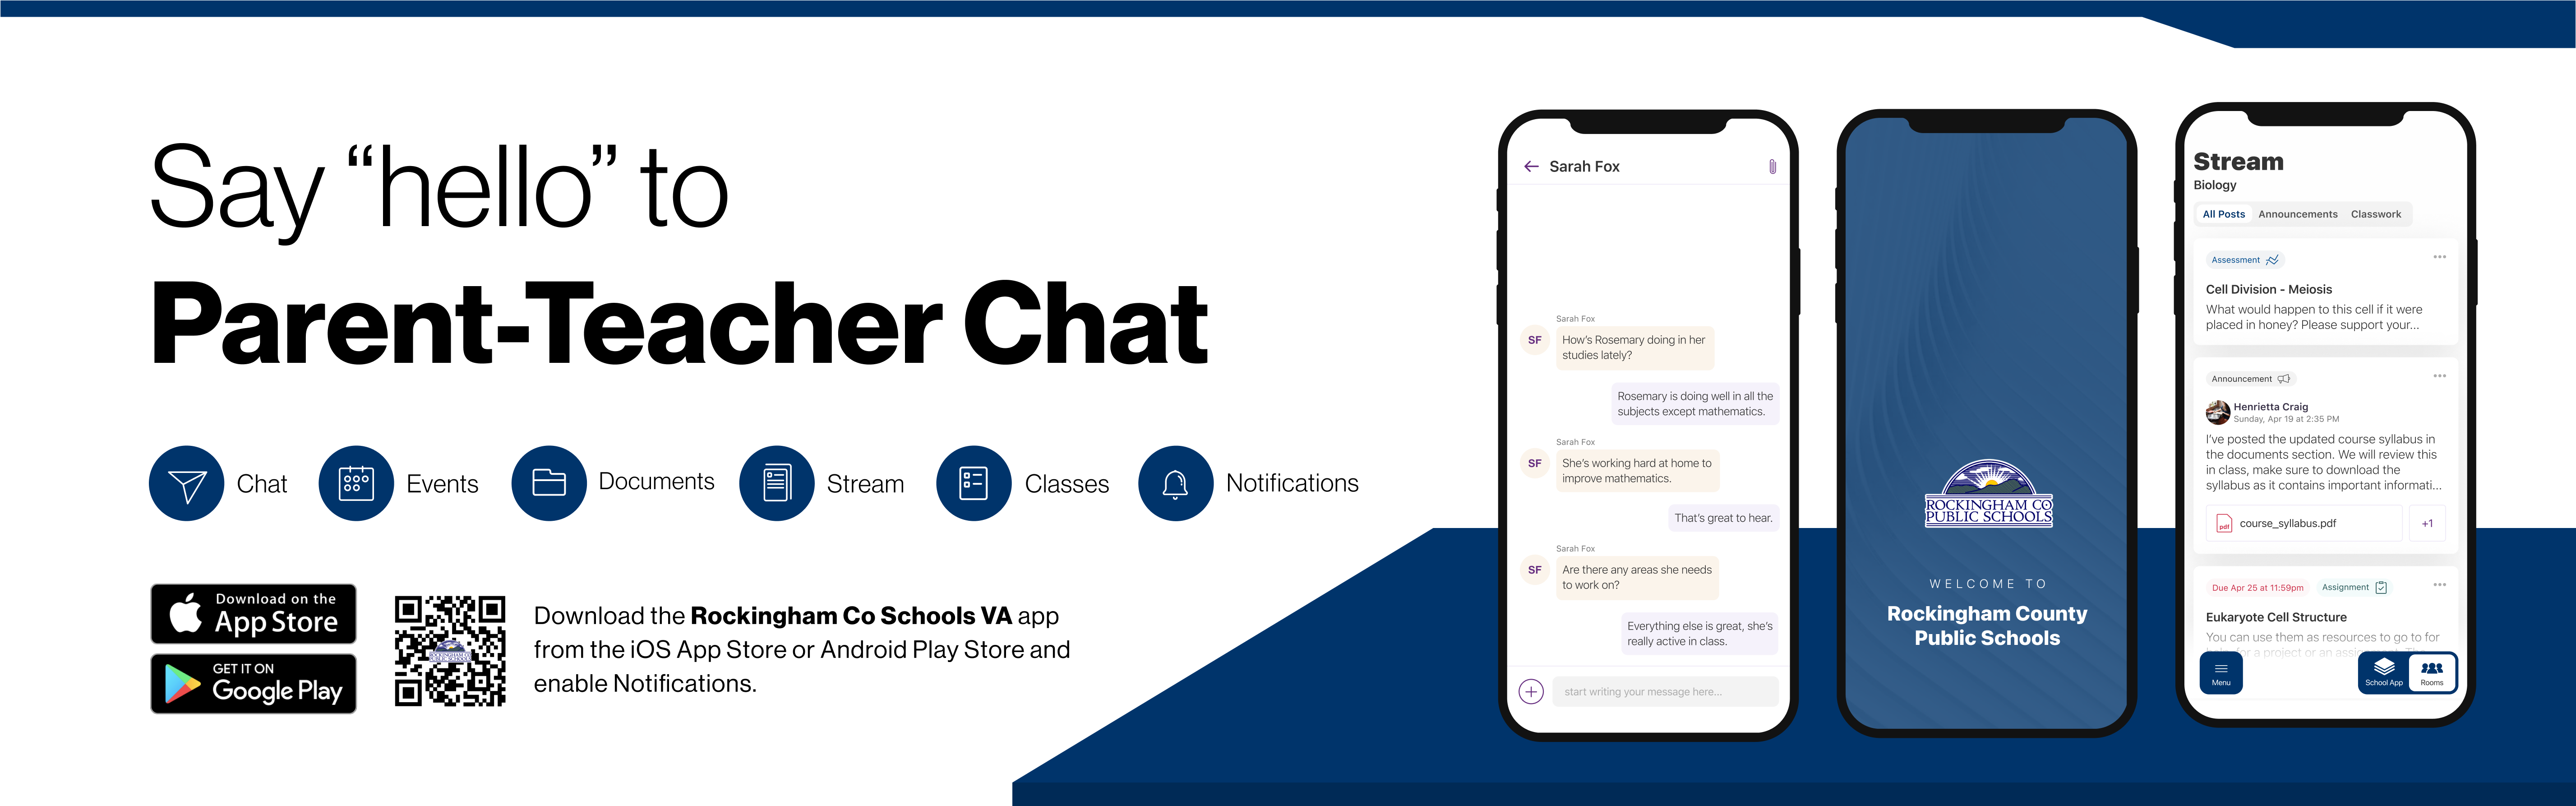 Say hello to Parent-Teacher chat in the new Rooms app. Download the Rockingham County Public Schools app in the Google Play or Apple App store.